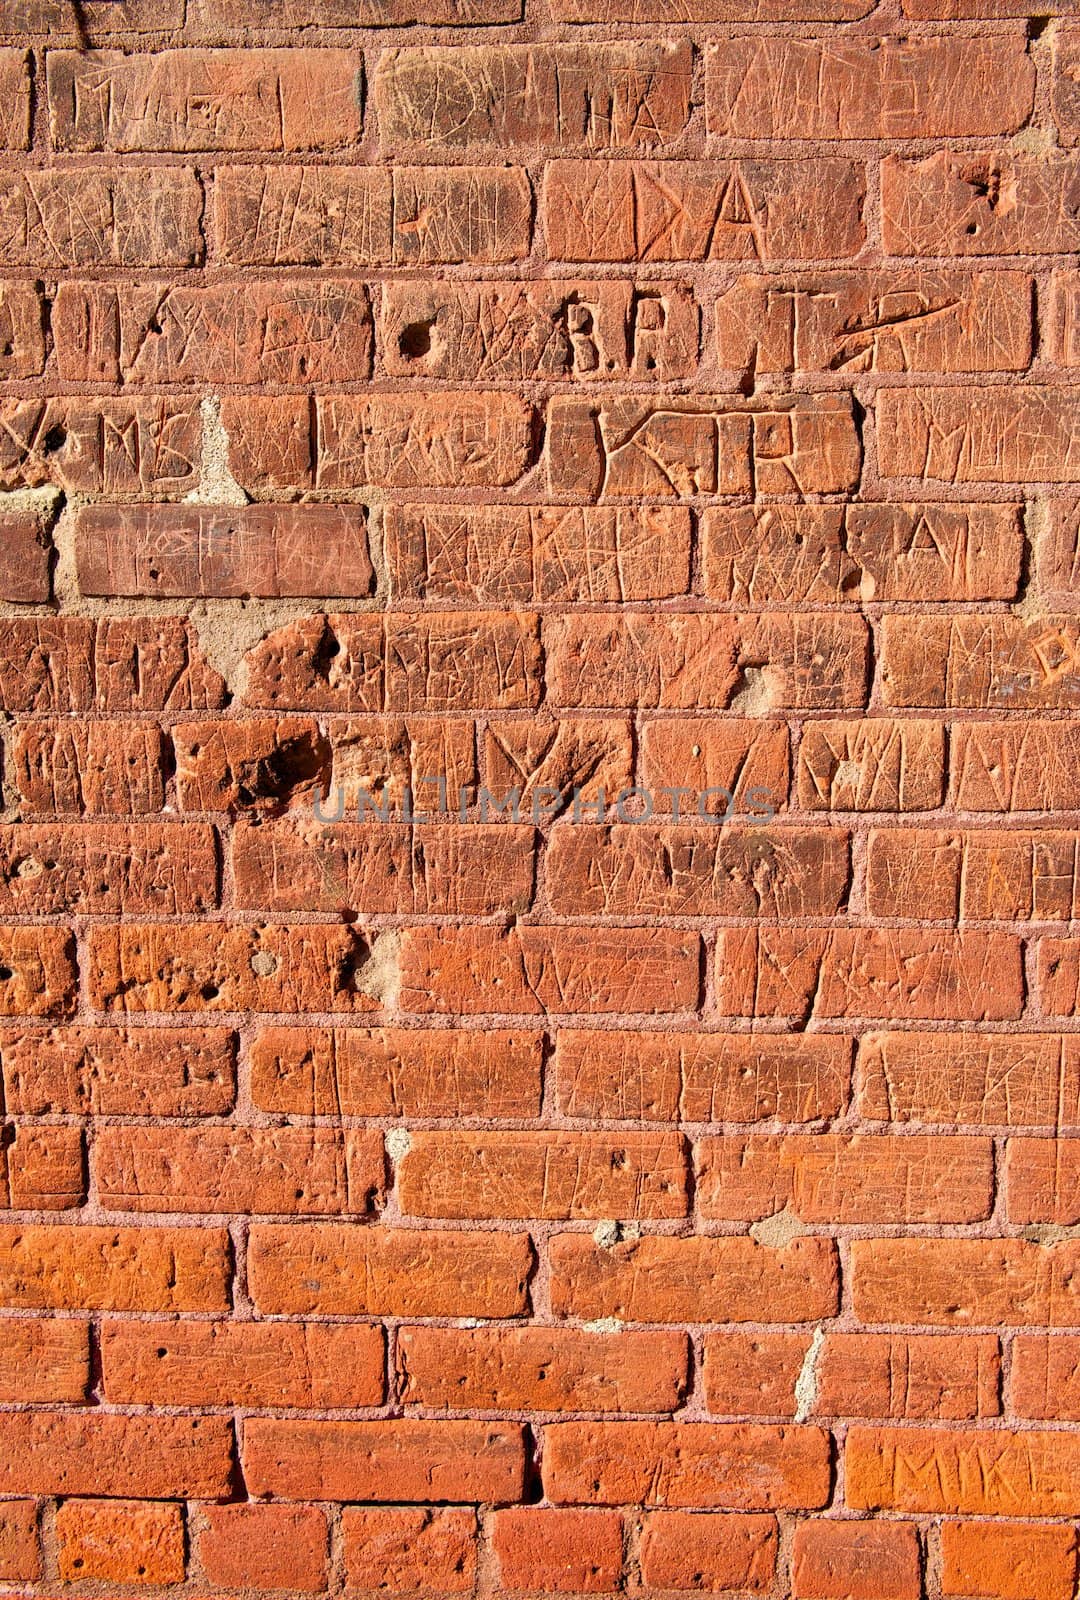 Grungy Brick Wall With Carvings by pixelsnap